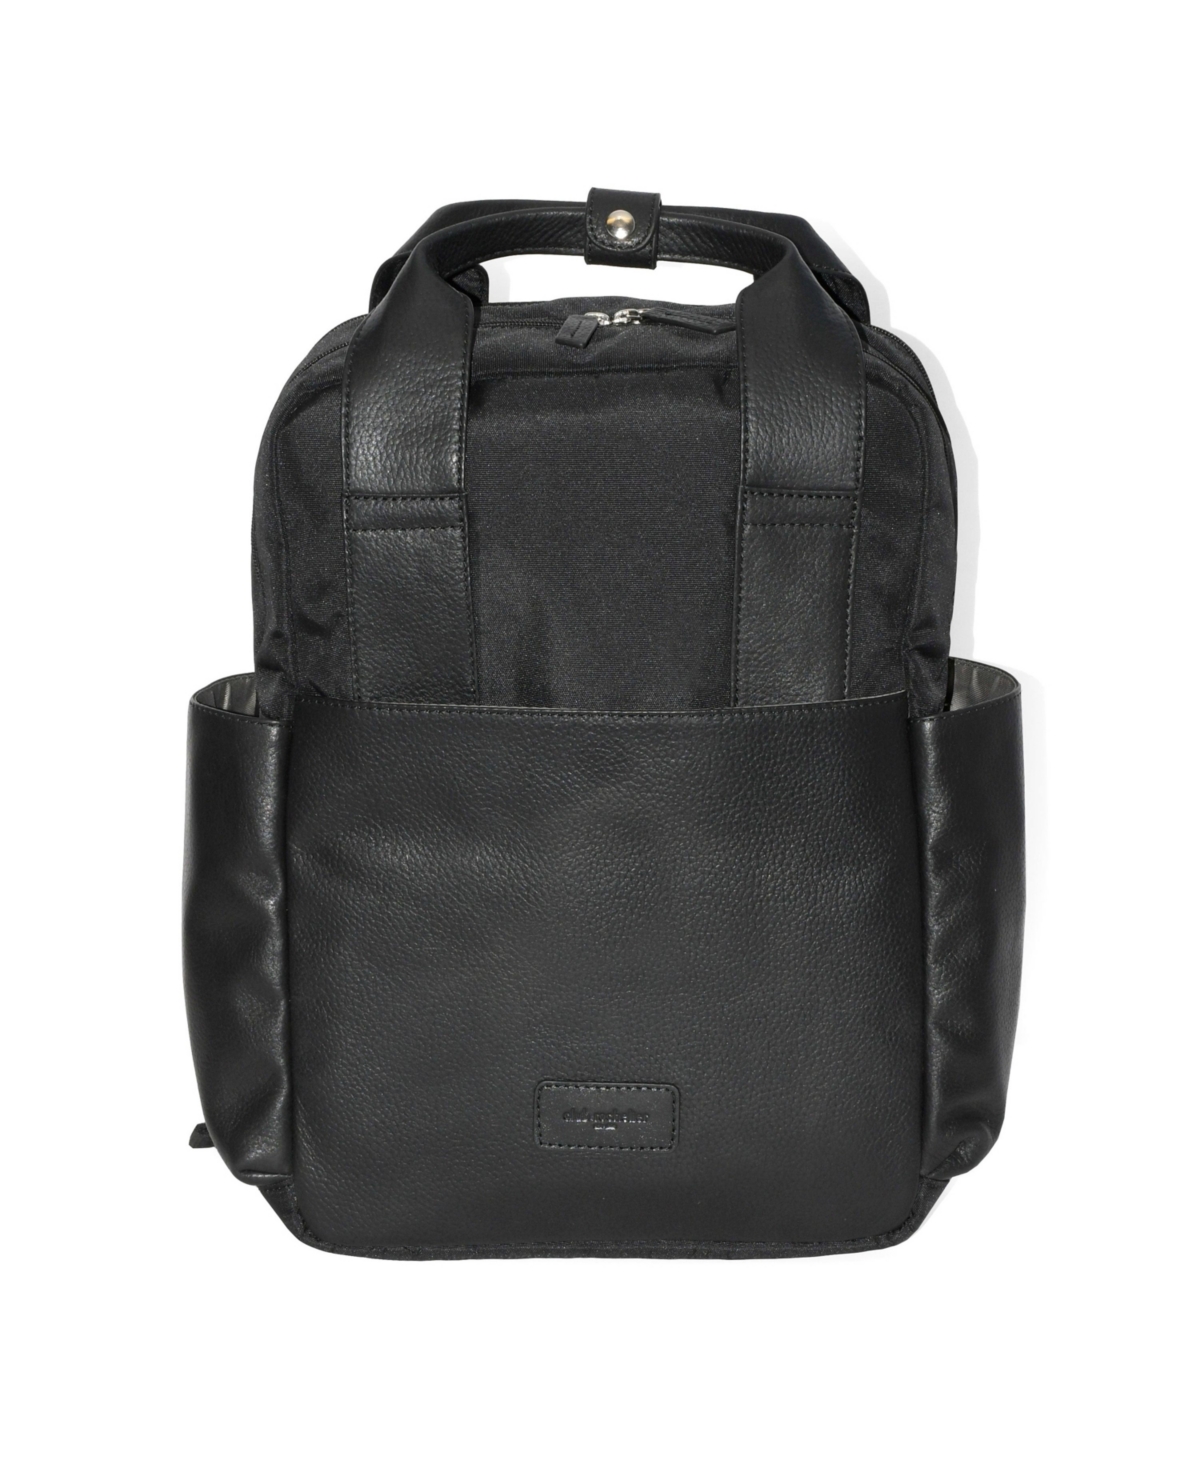 CLUB ROCHELIER LEATHER BACKPACK WITH DOUBLE HANDLES AND MULTI POCKETS